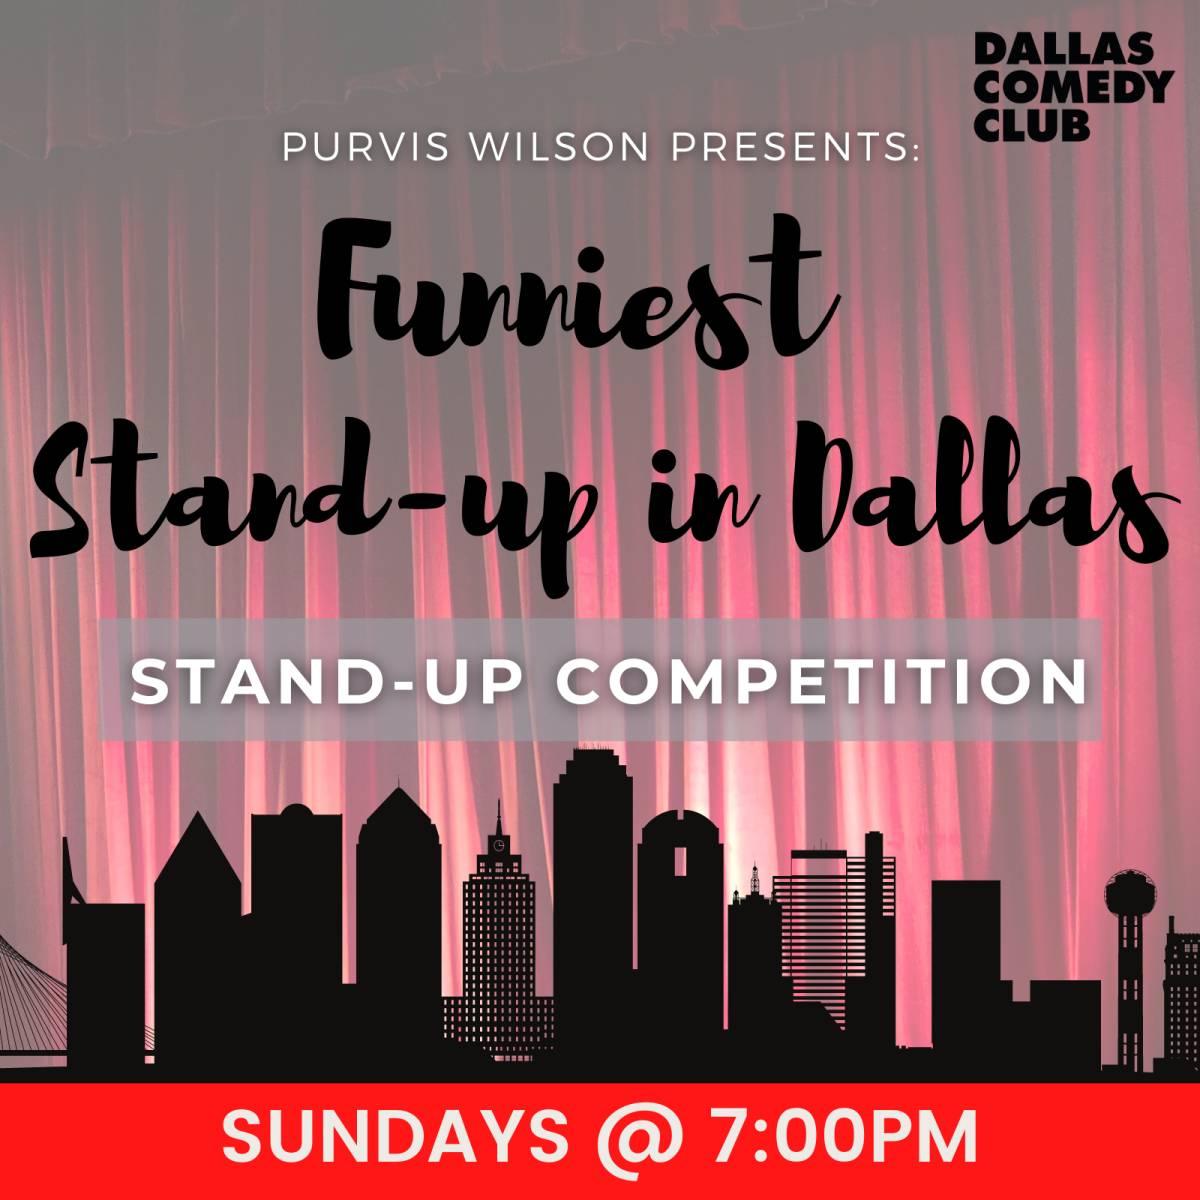 Purvis Wilson Presents: The Funniest Stand-up in Dallas Competition - Semifinals!